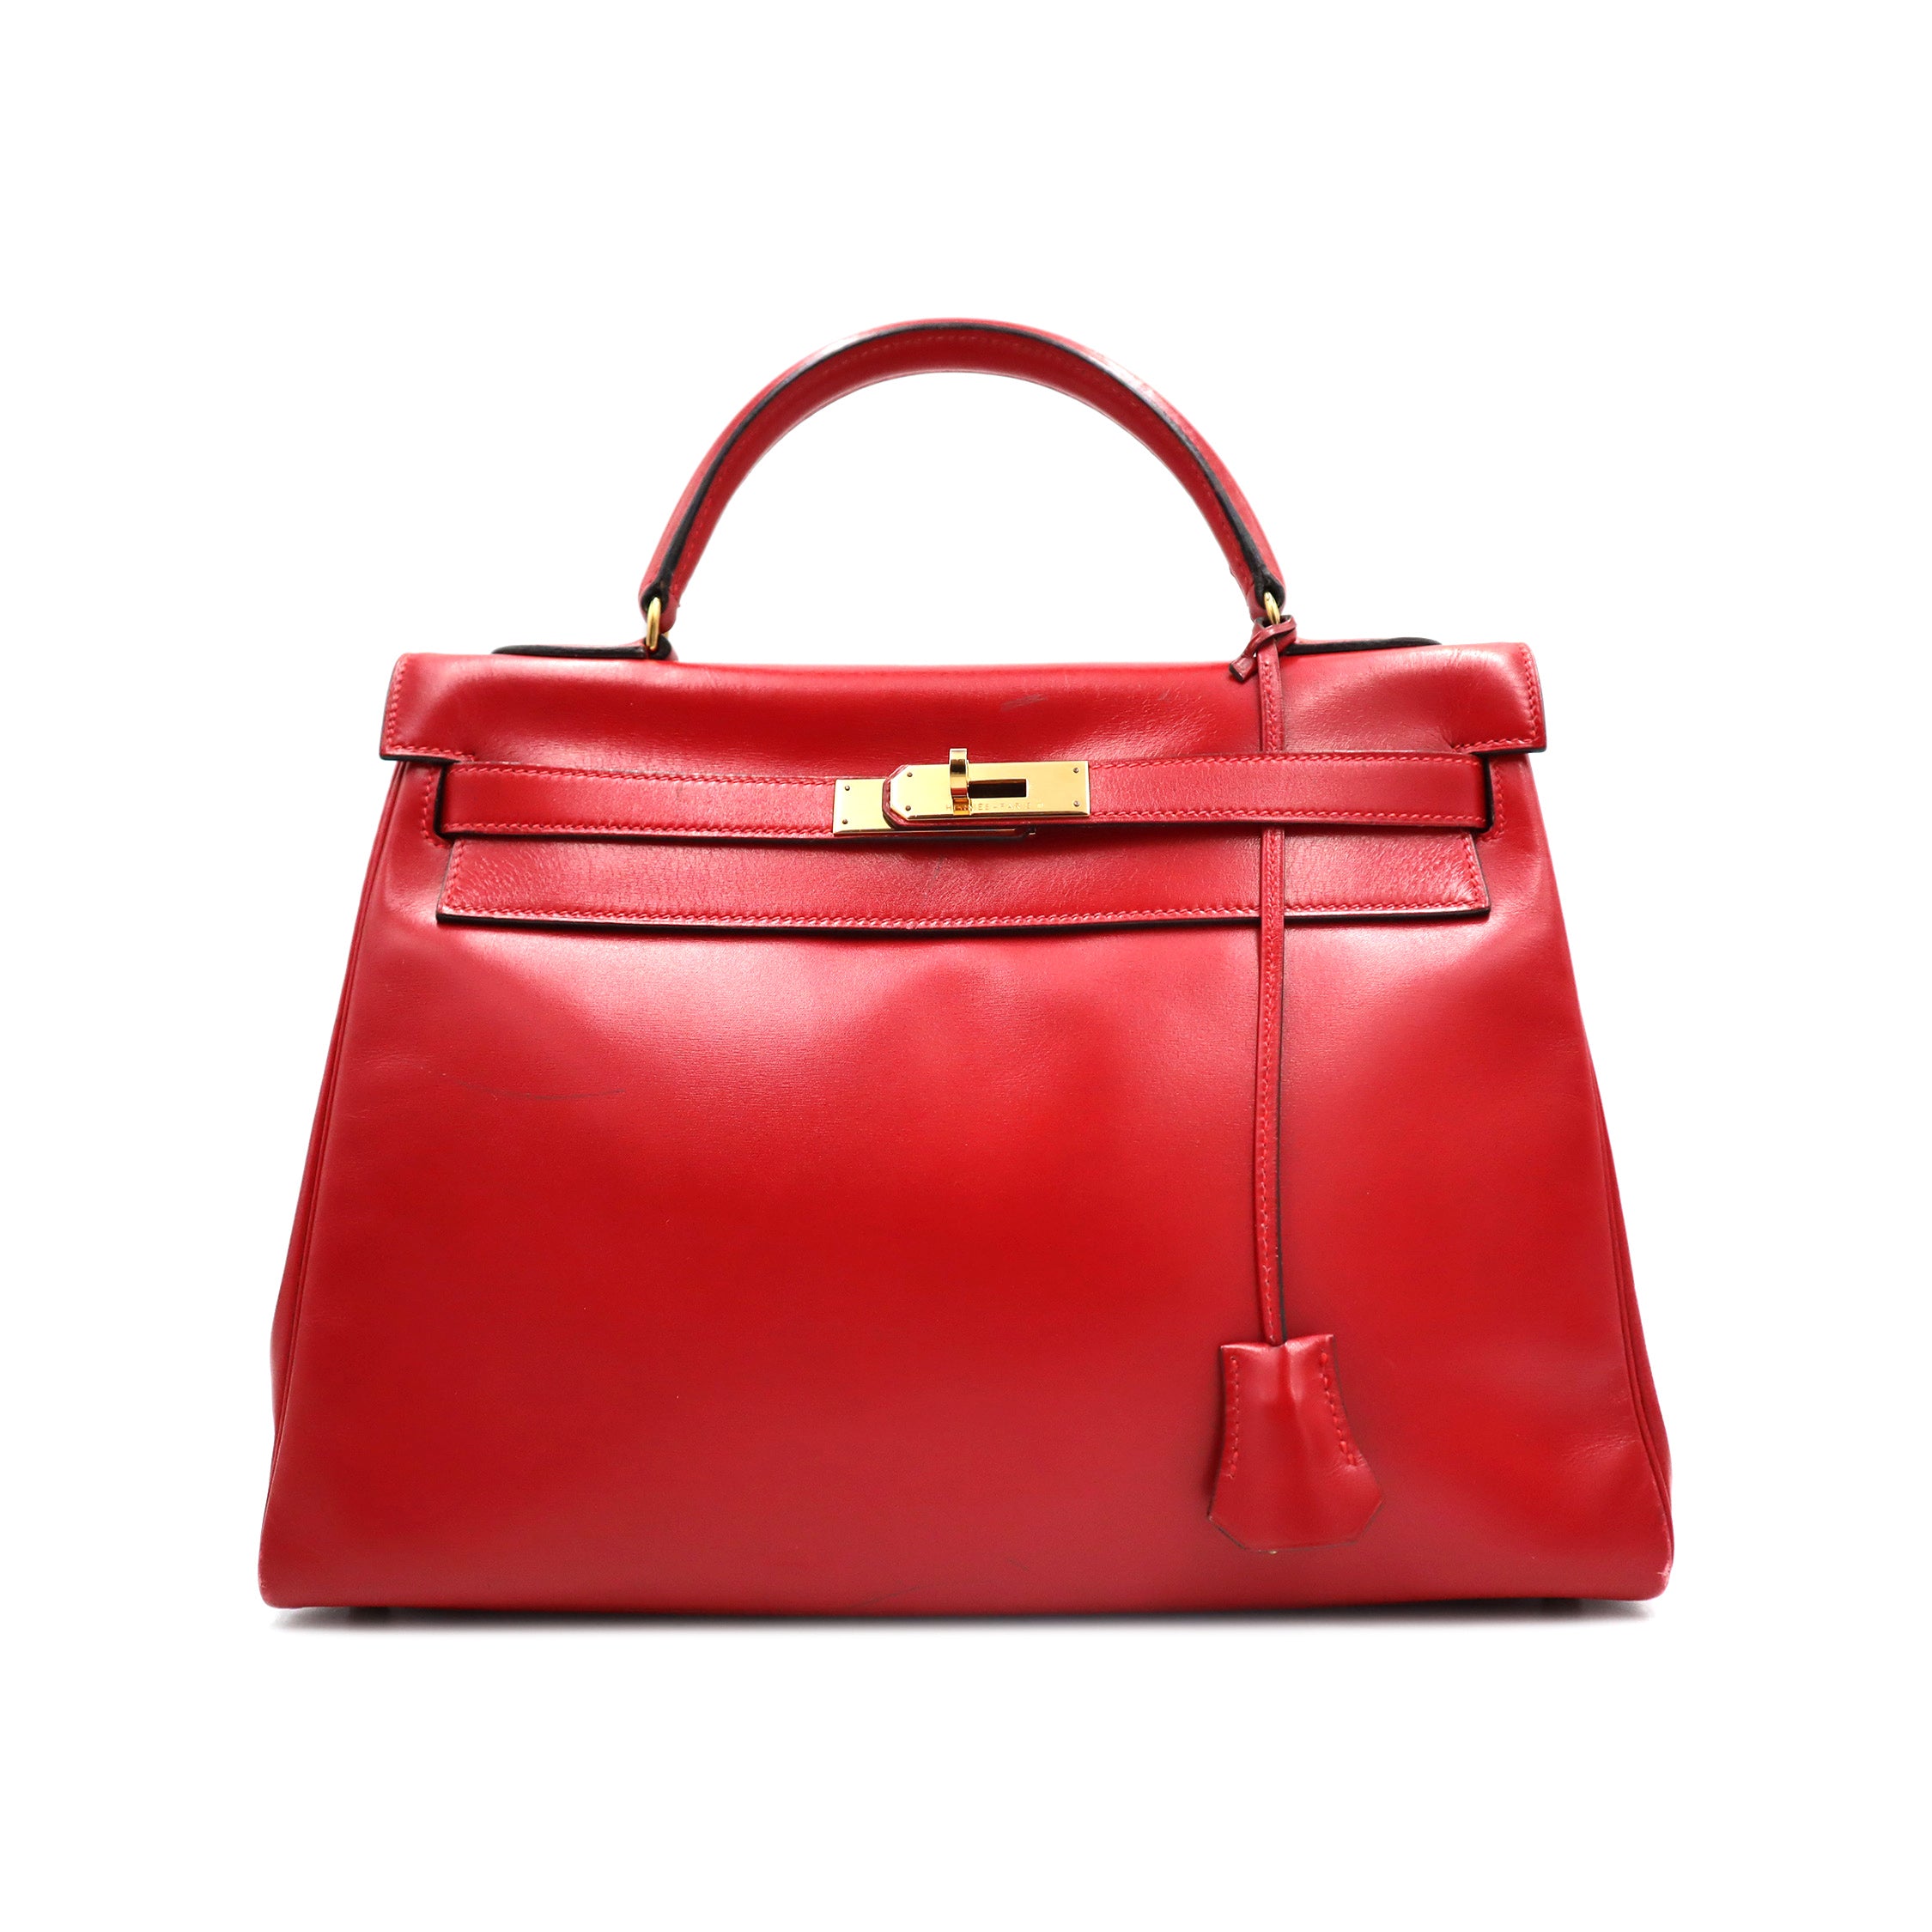 Pre-Owned Hermes Kelly 32 Retourne Handbag Red Box Calf with Gold Hardware